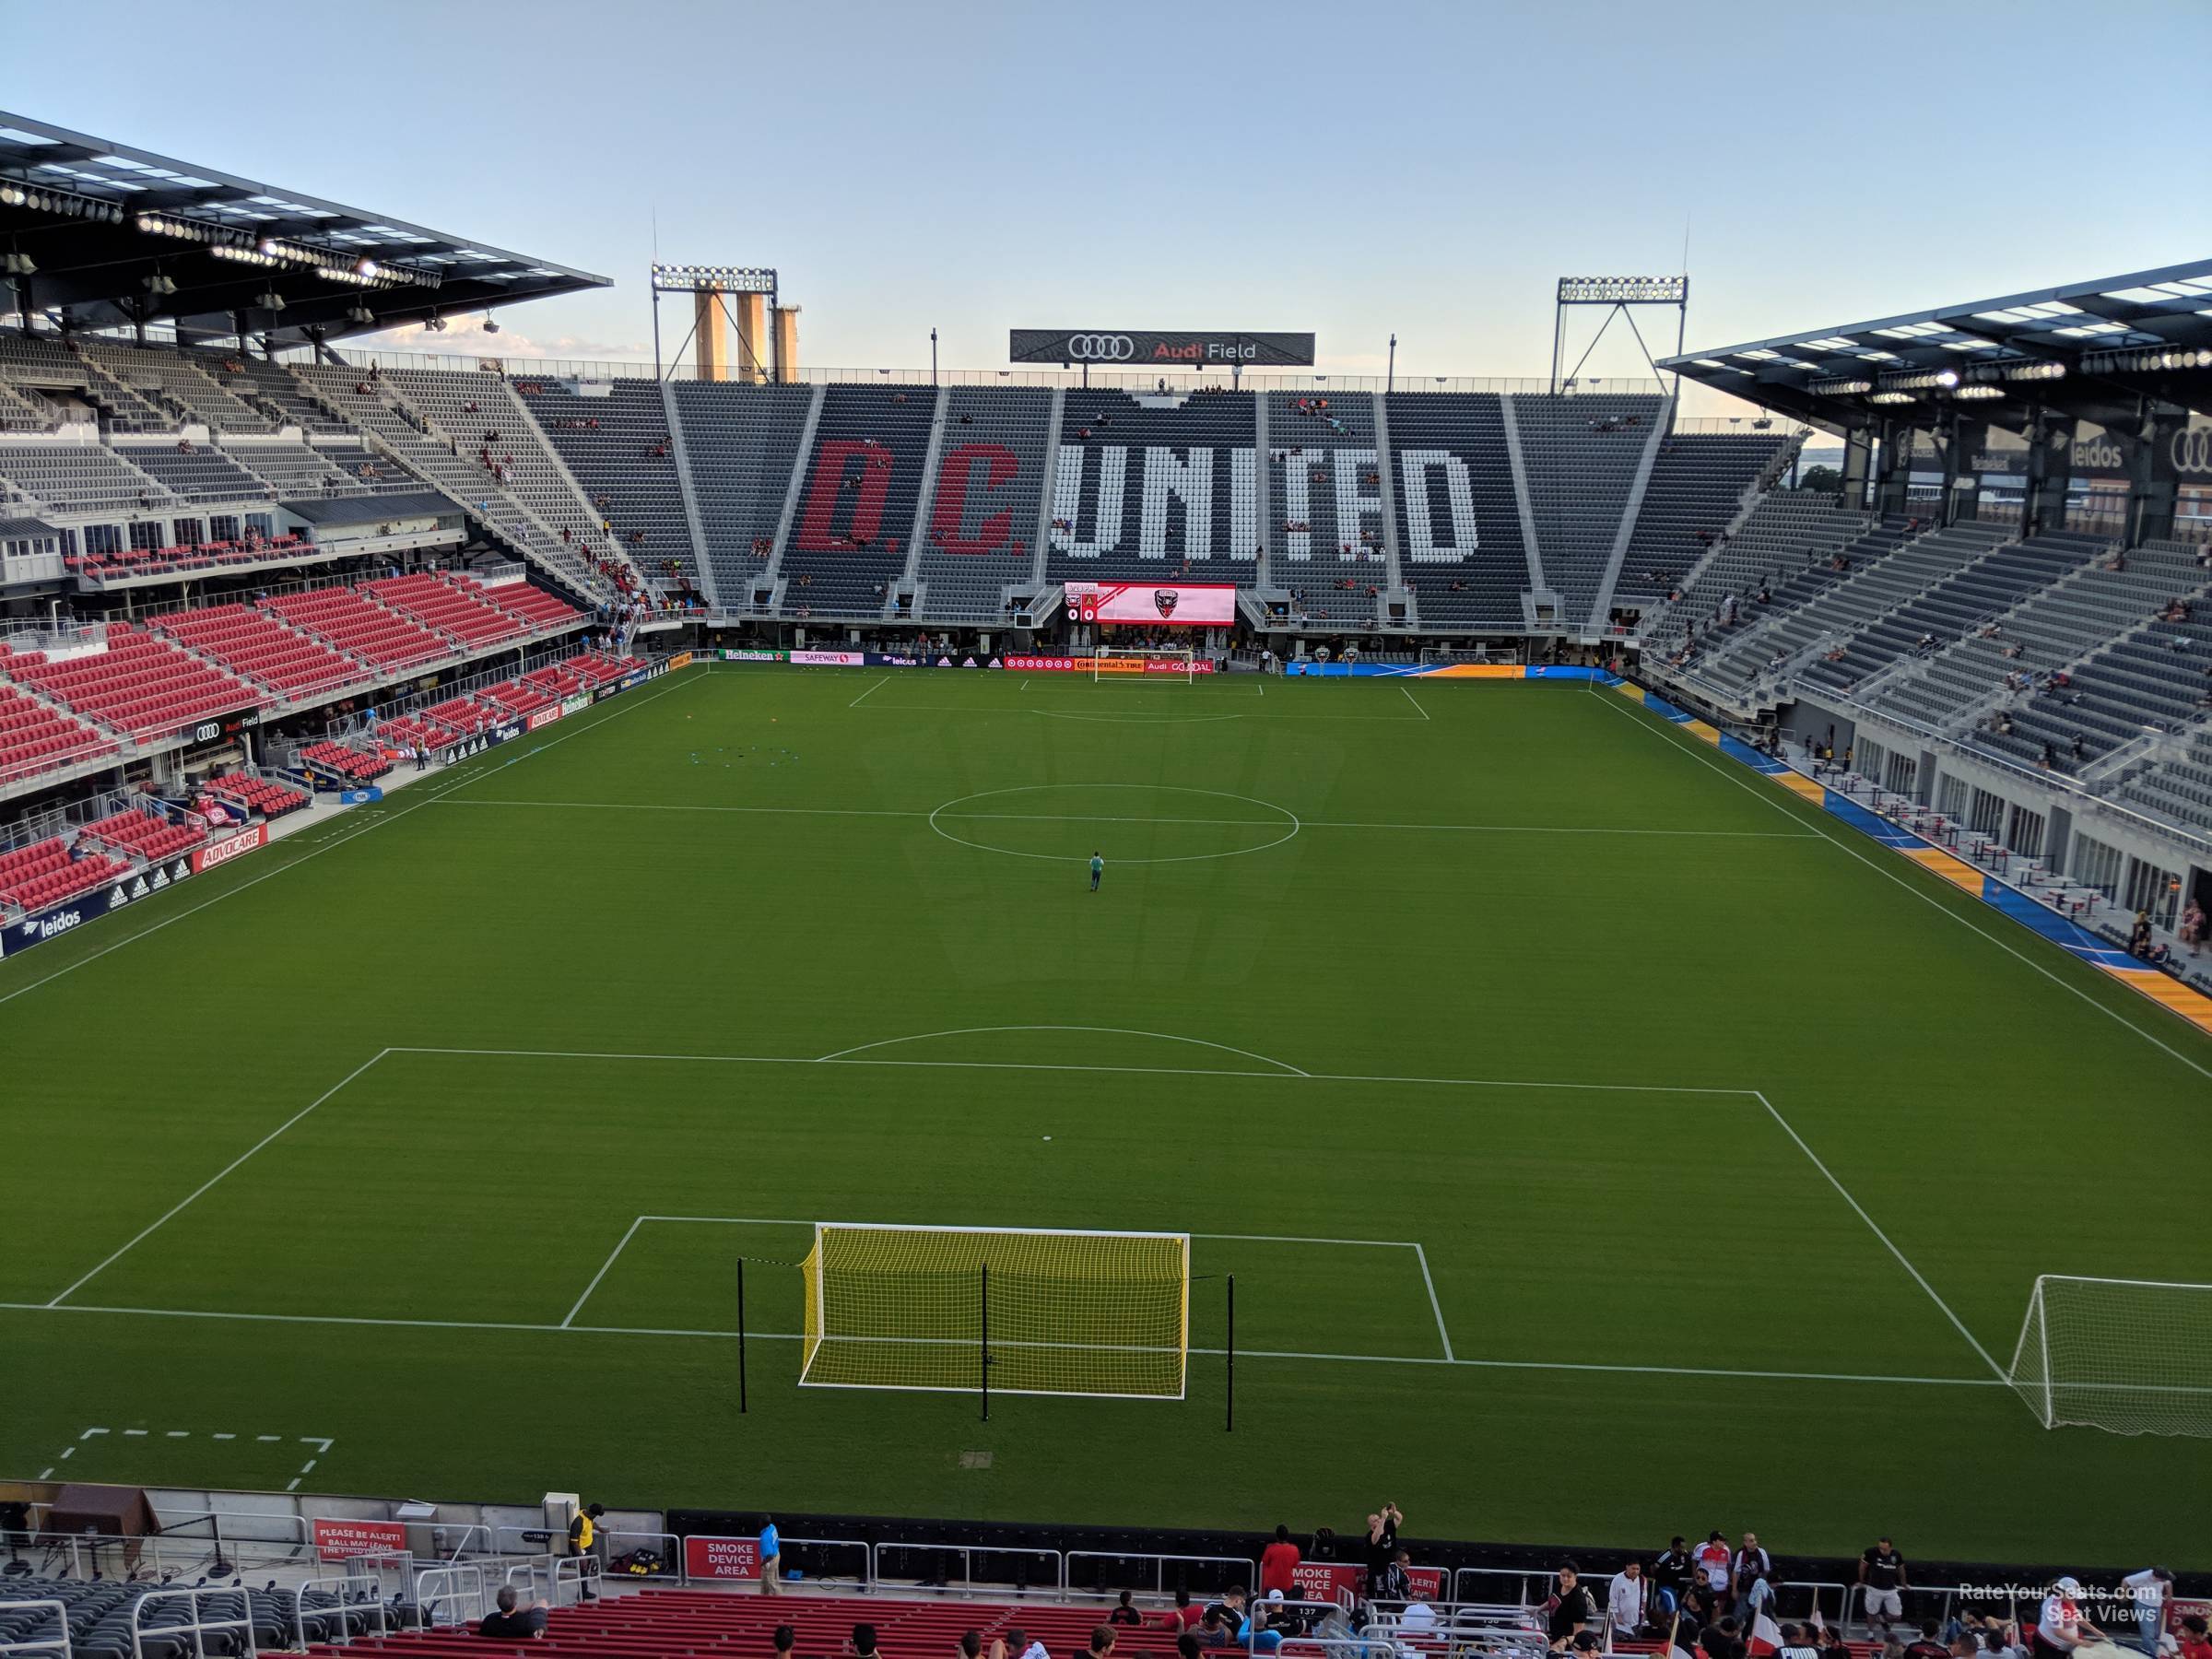 section 137, row 28 seat view  - audi field